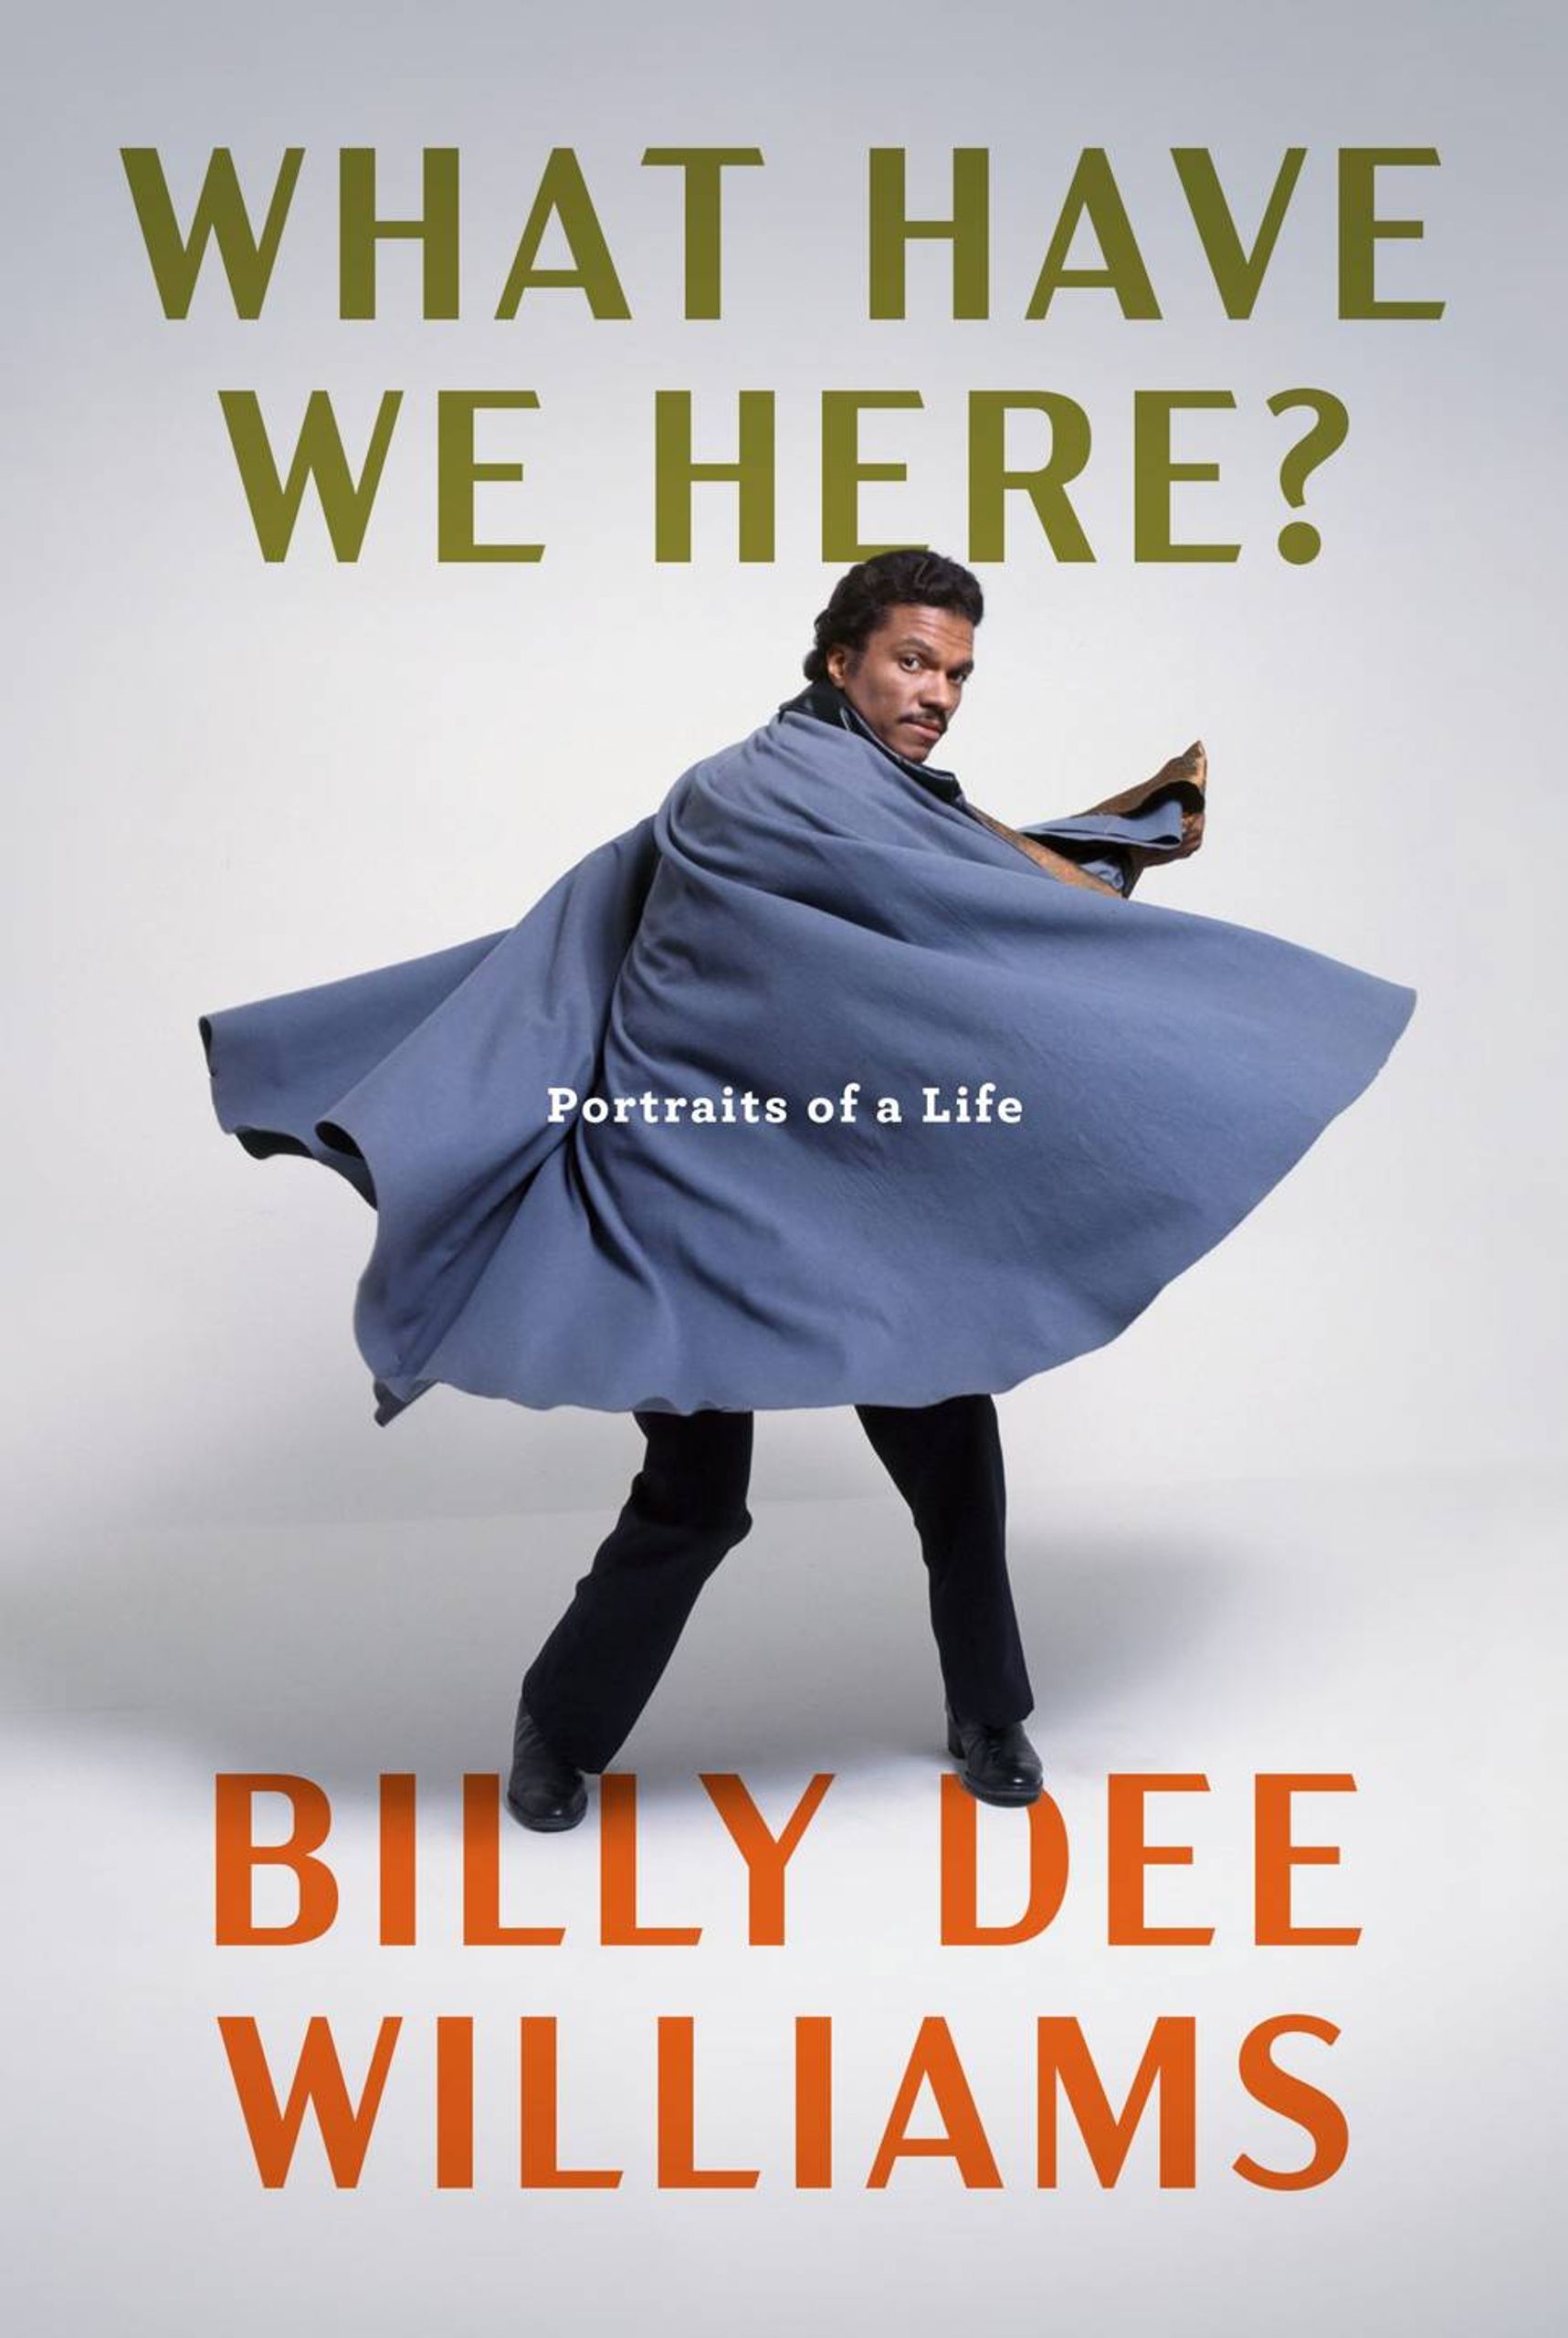 "What Have We Here? Portraits of a Life" by Billy Dee Williams